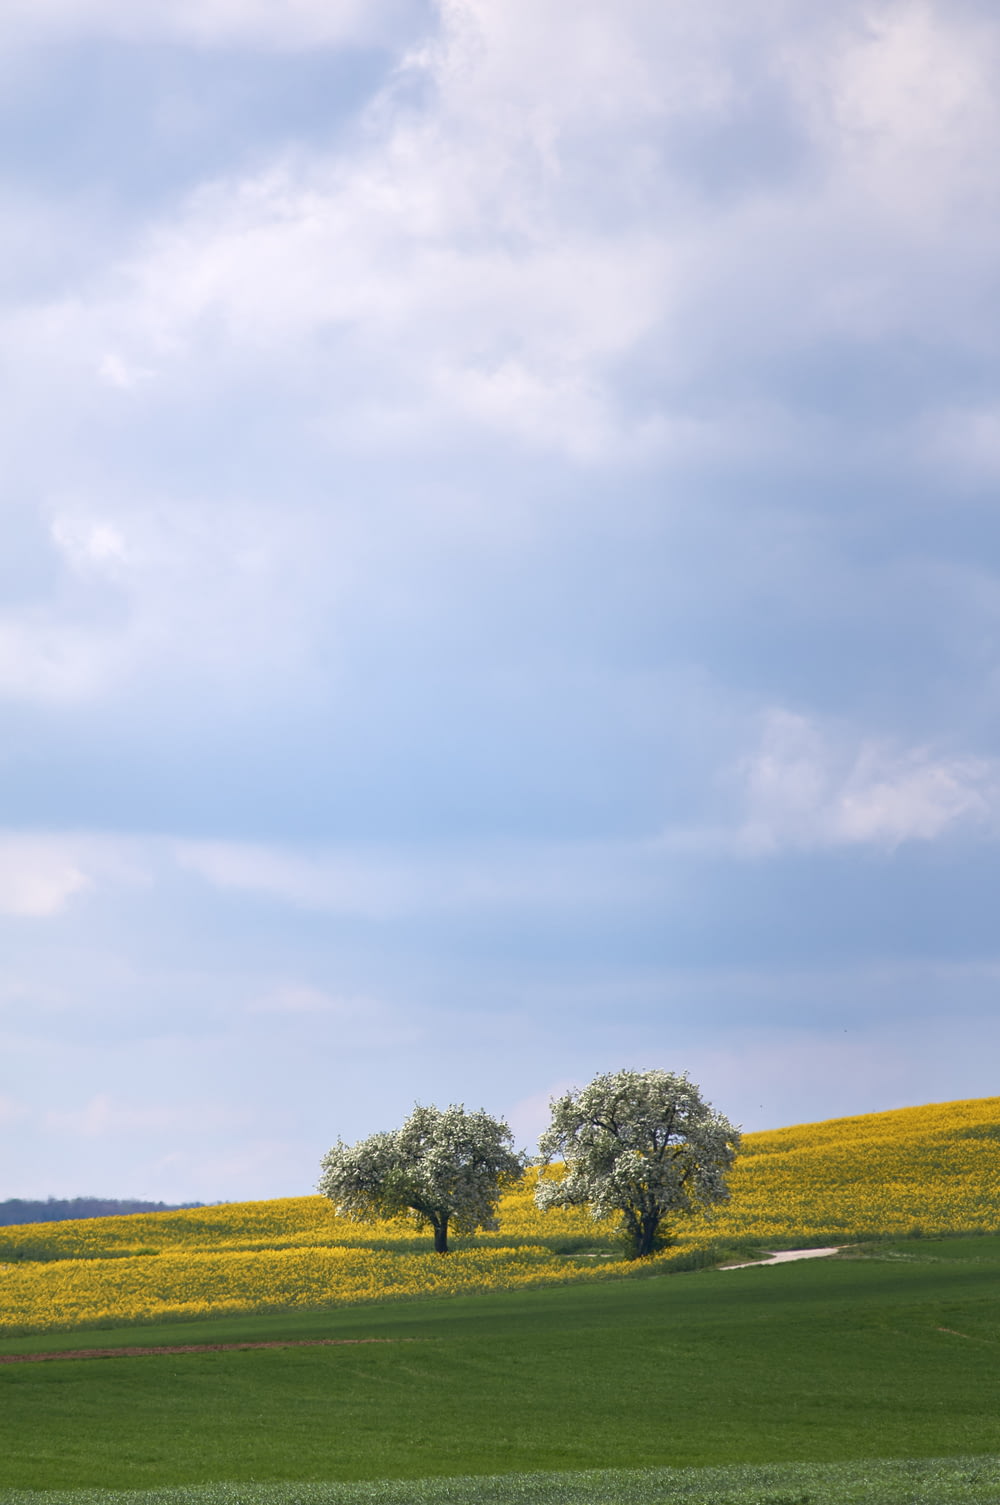 two trees in a field of yellow flowers